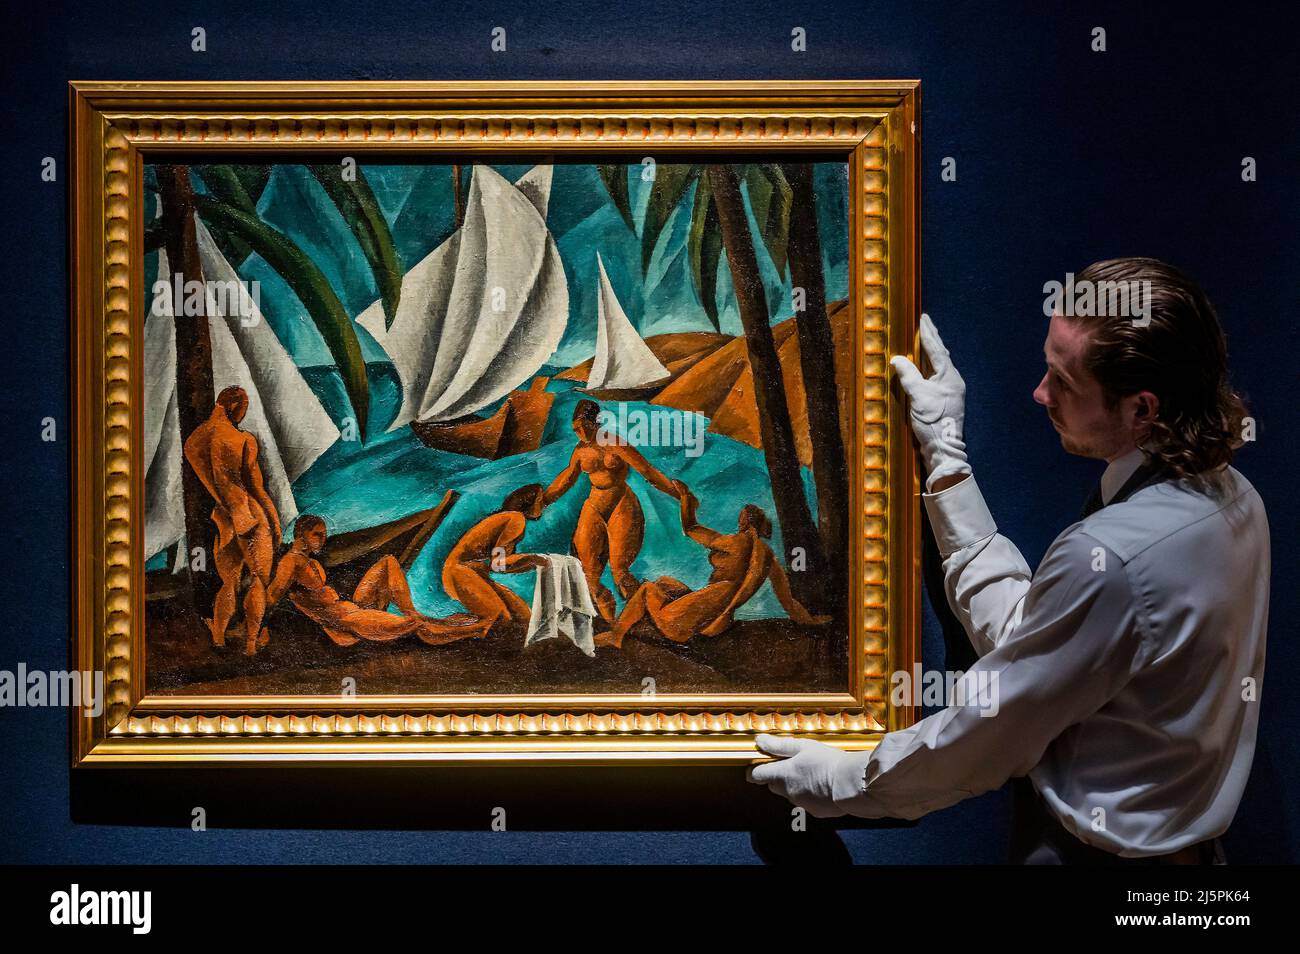 London, UK. 25th Apr, 2022. Amshei Nurenberg, White sails, 1916 - Highlights from Safeguarding the Irreplaceable: A Selling Exhibition to Benefit the Ukraine Heritage Response Fund at World Monuments Fund at Christie's, London. Credit: Guy Bell/Alamy Live News Stock Photo